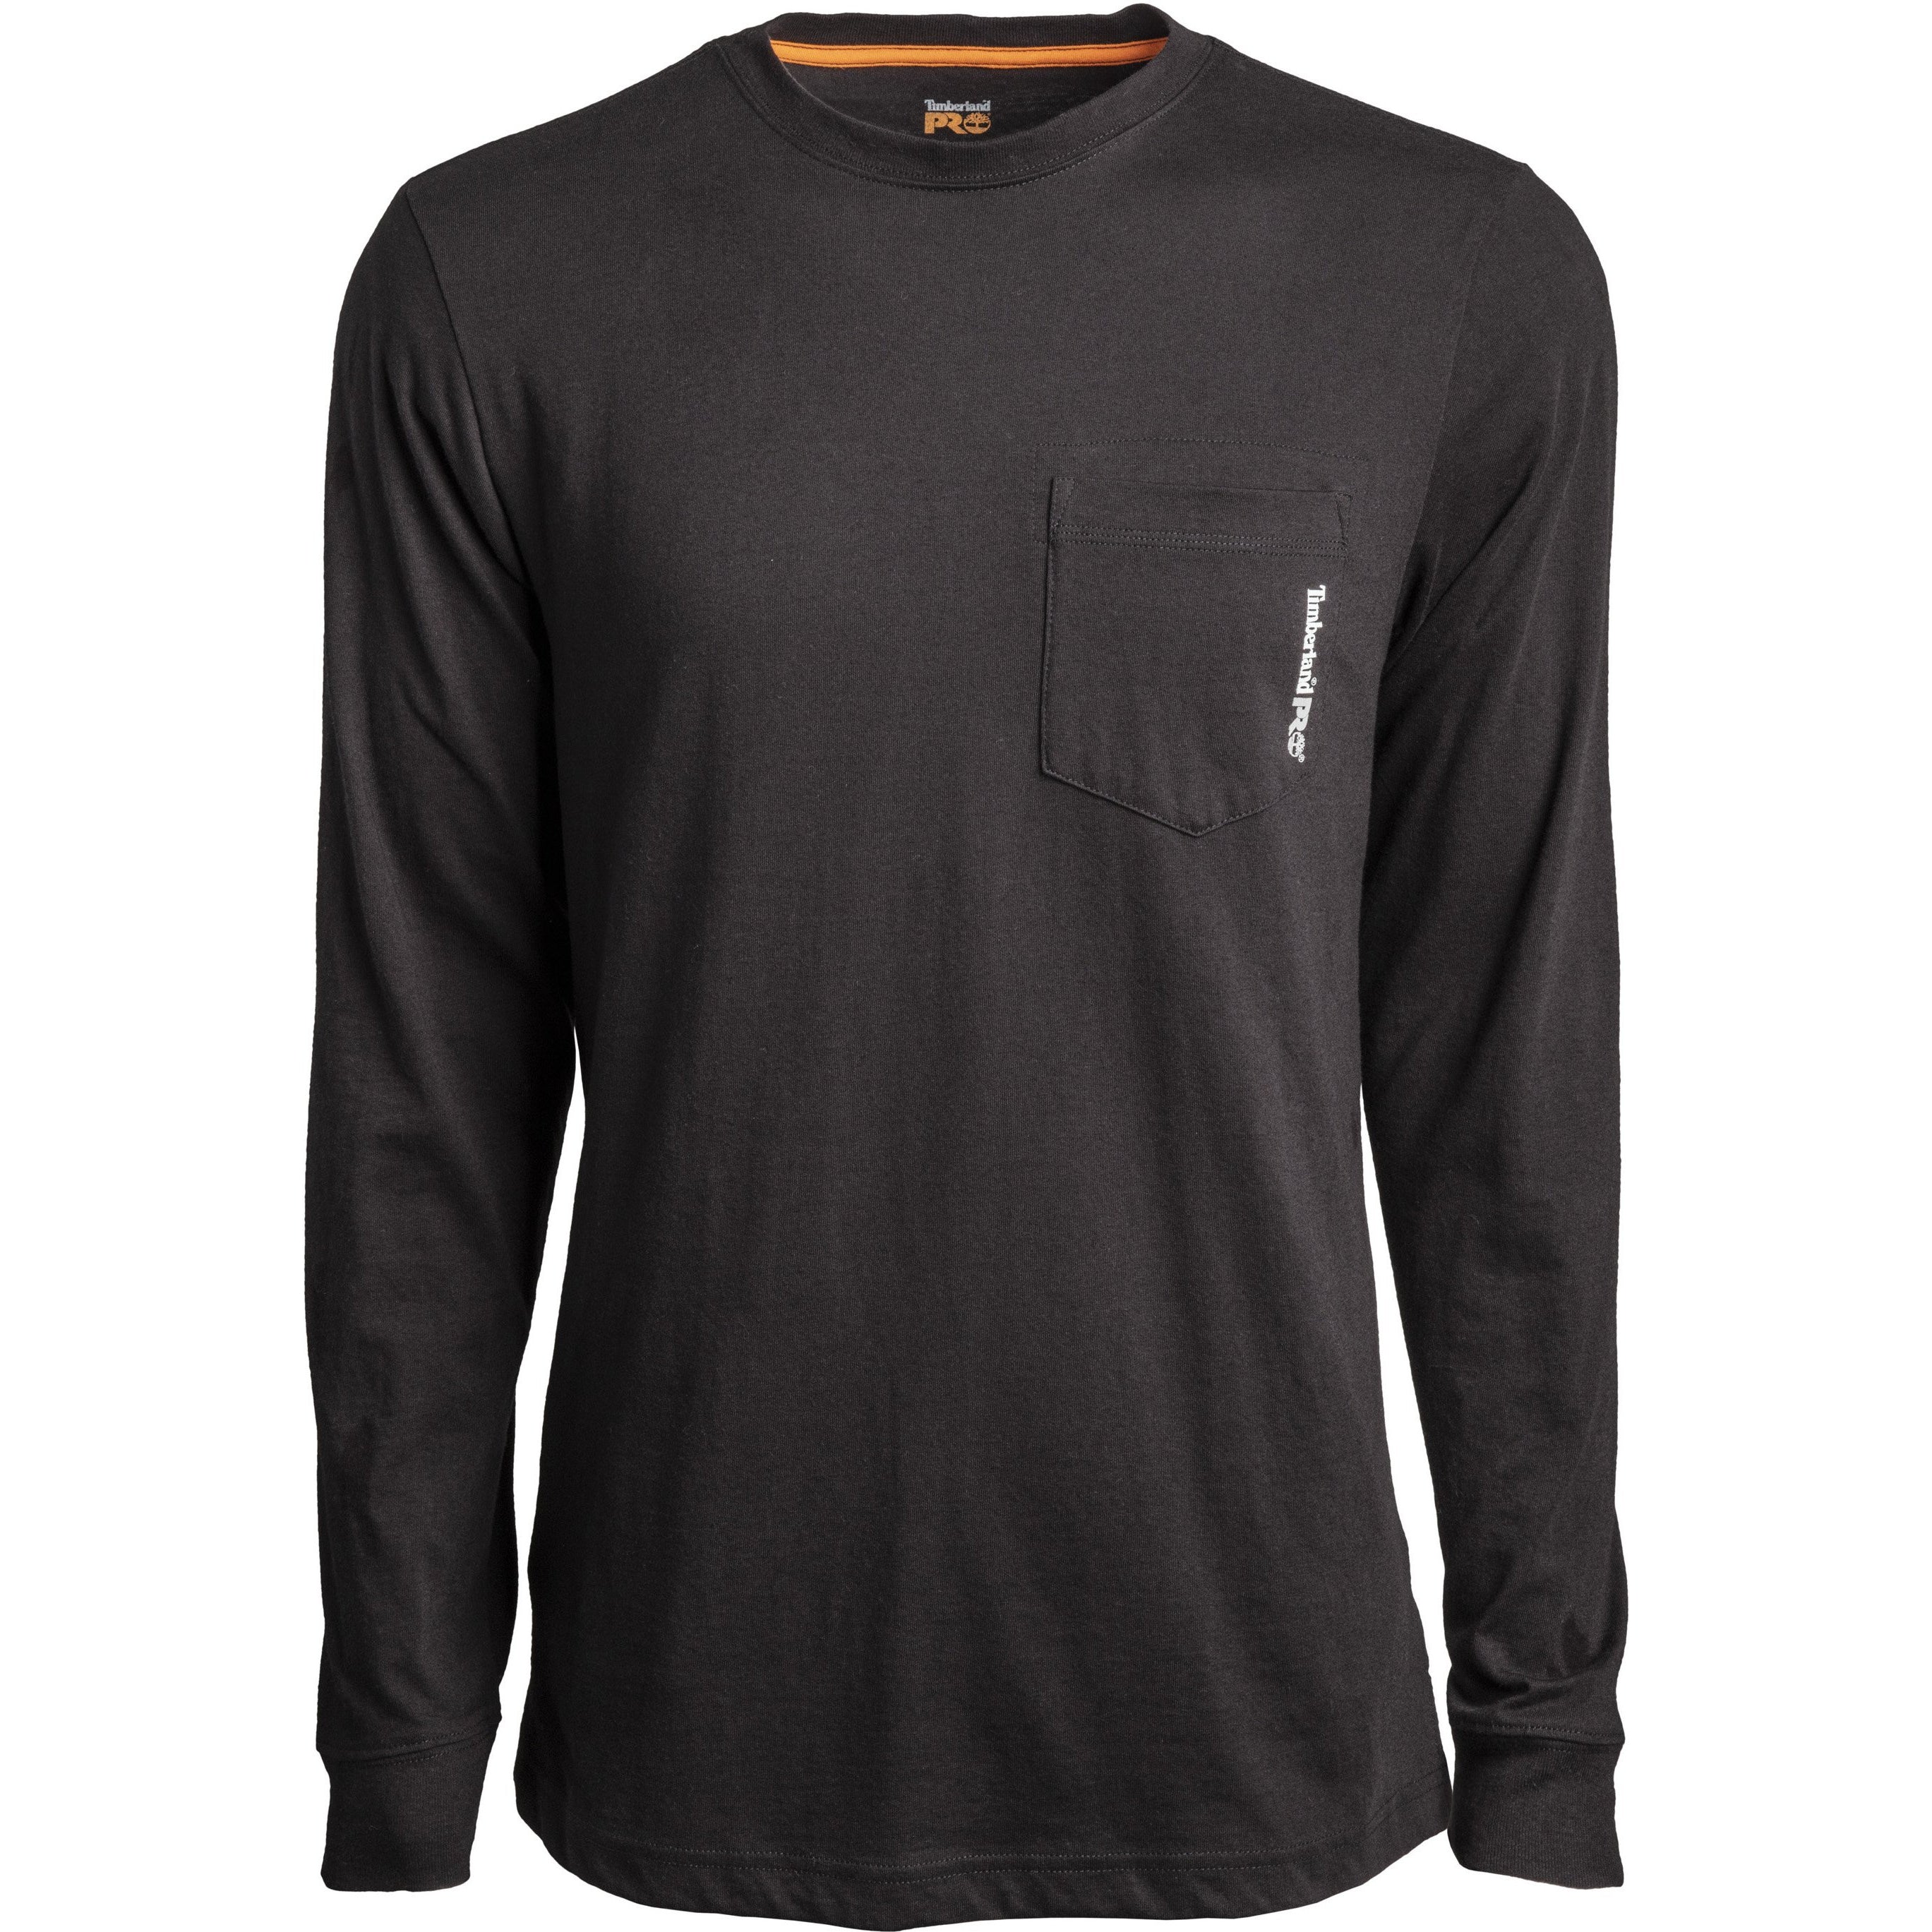 Timberland Pro Men's Base Plate Long Sleeve T-Shirt TB0A1OZ9015 Small / Black - Overlook Boots